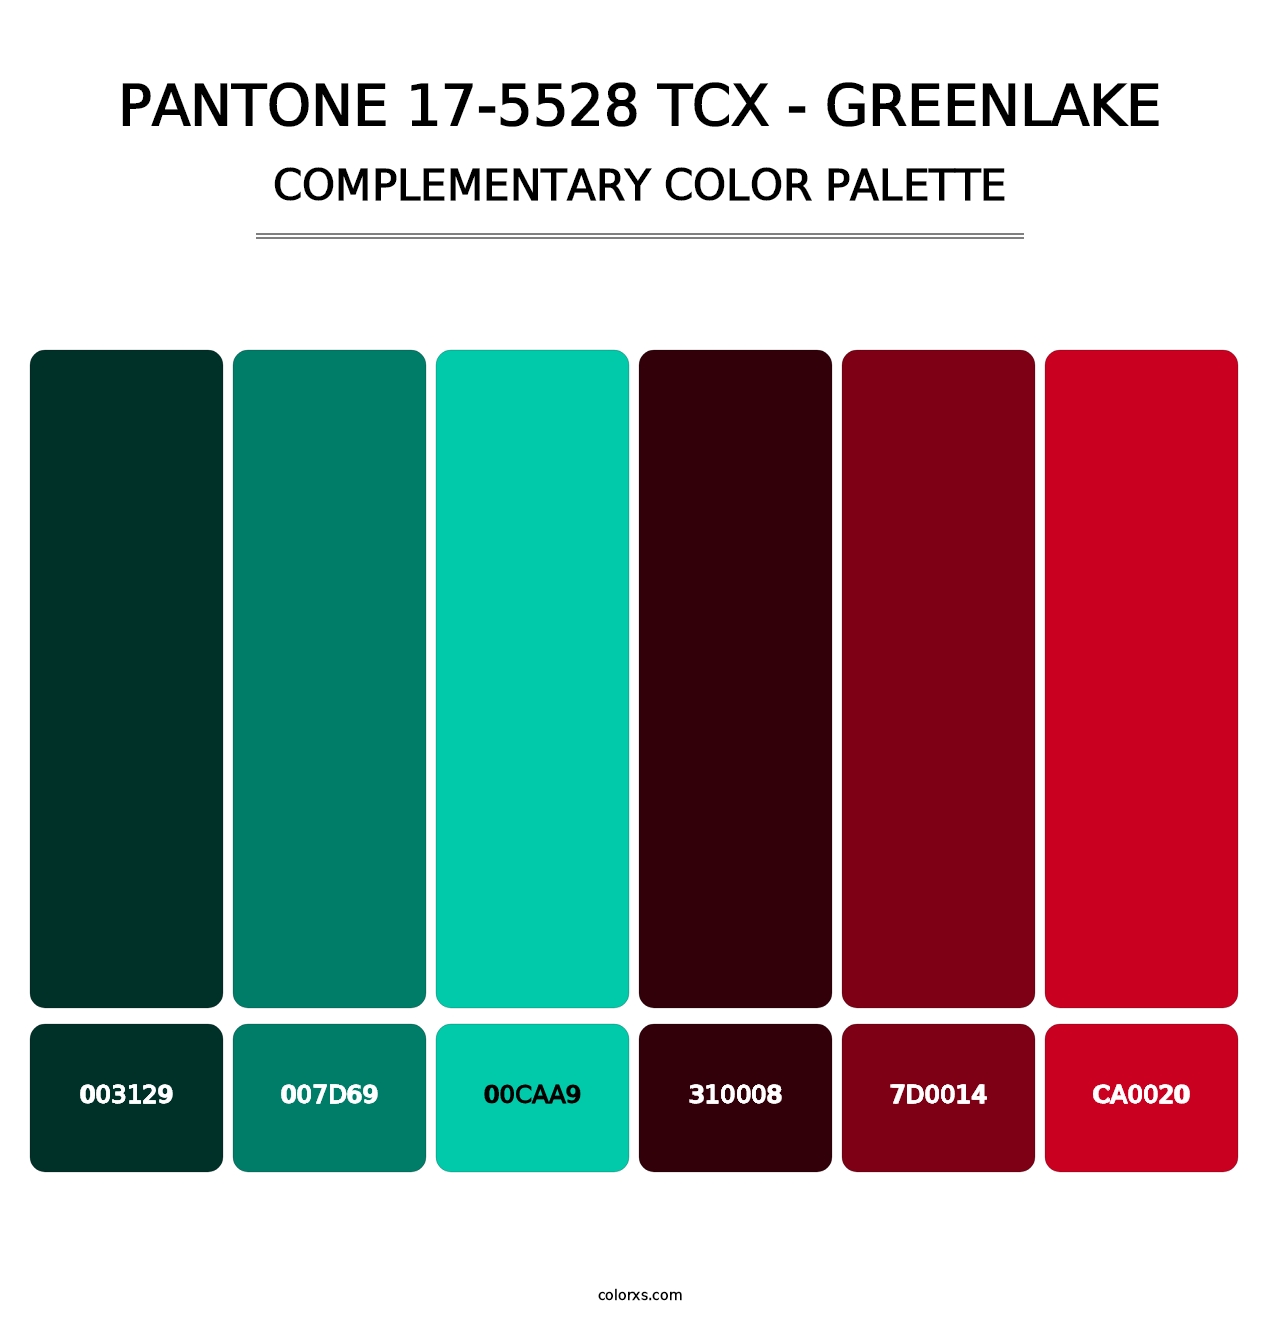 PANTONE 17-5528 TCX - Greenlake - Complementary Color Palette